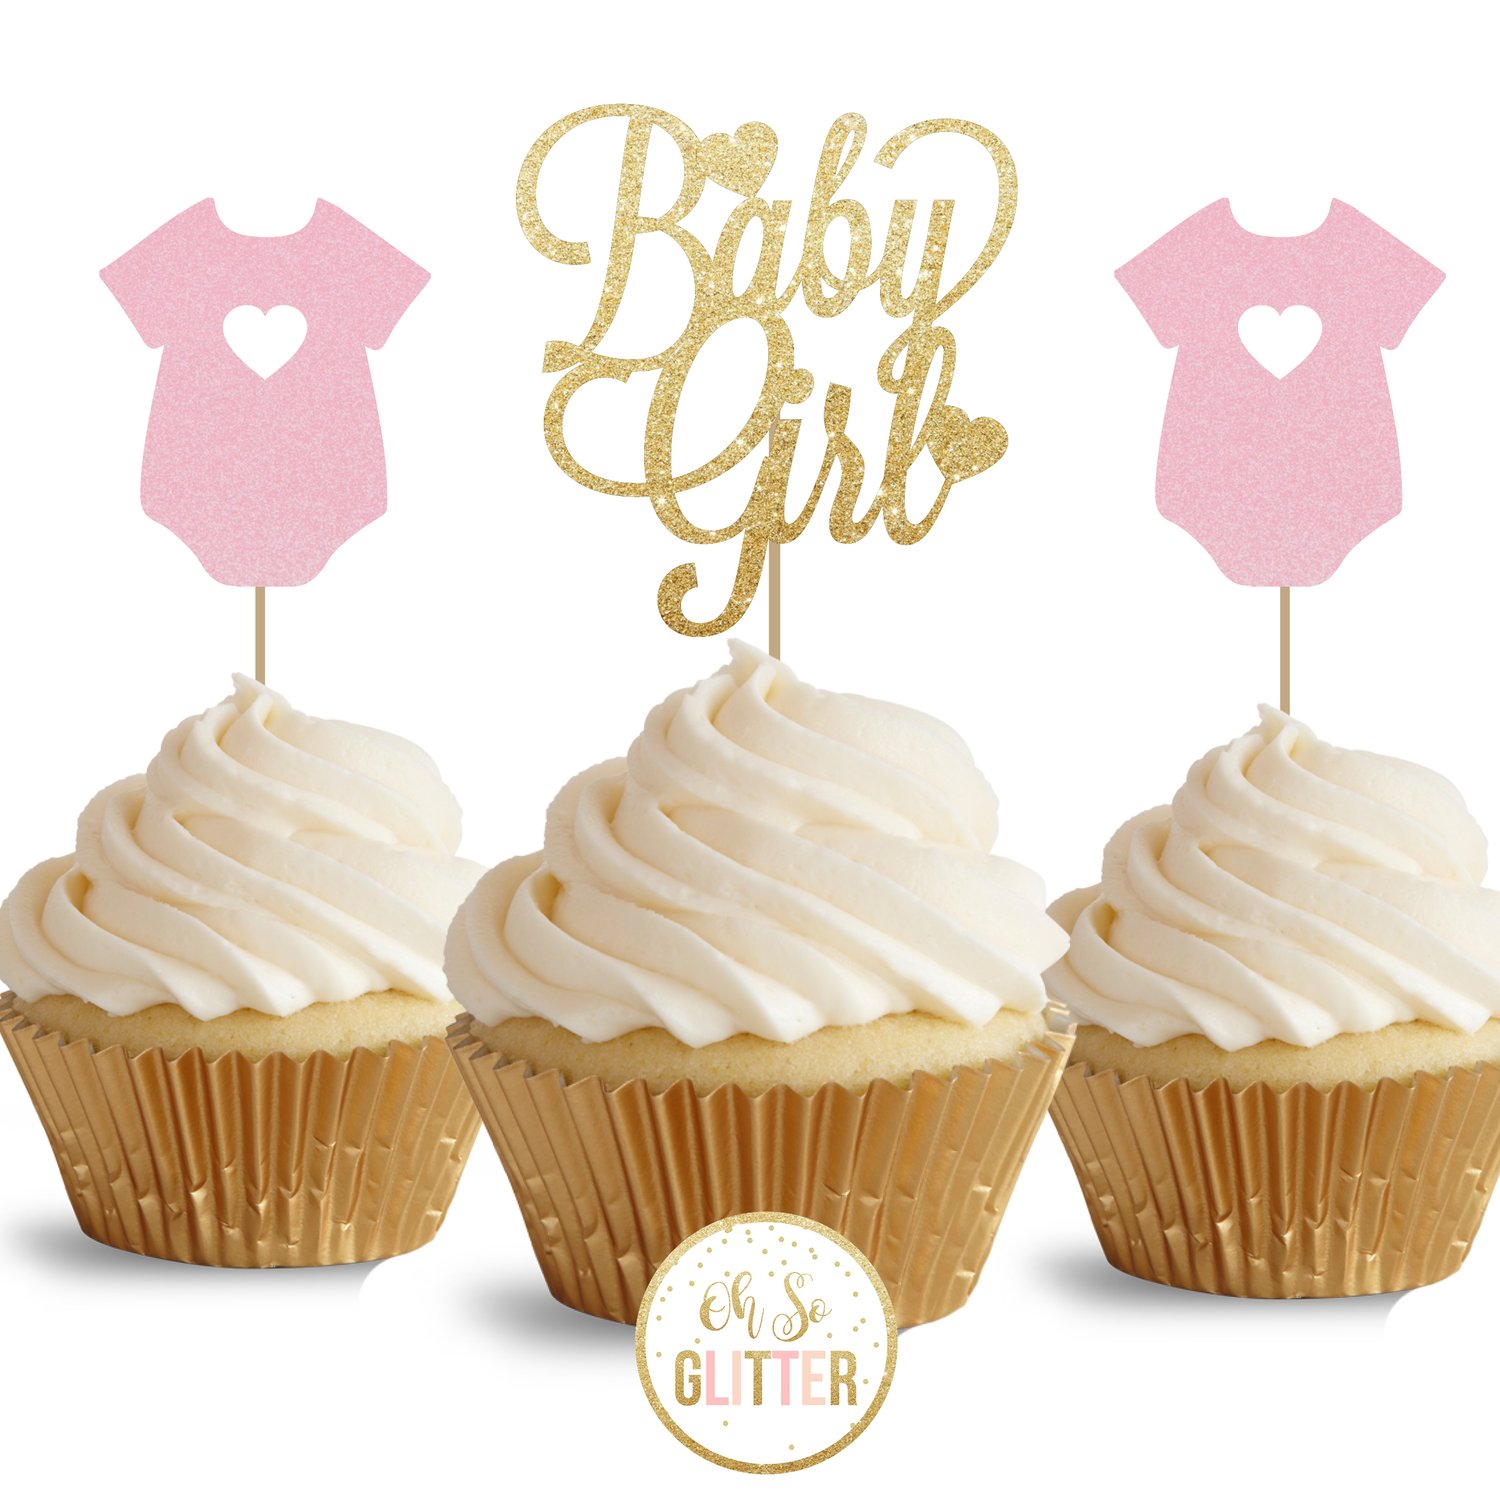 Image of Baby Girl - glitter cupcake toppers - pack of 12